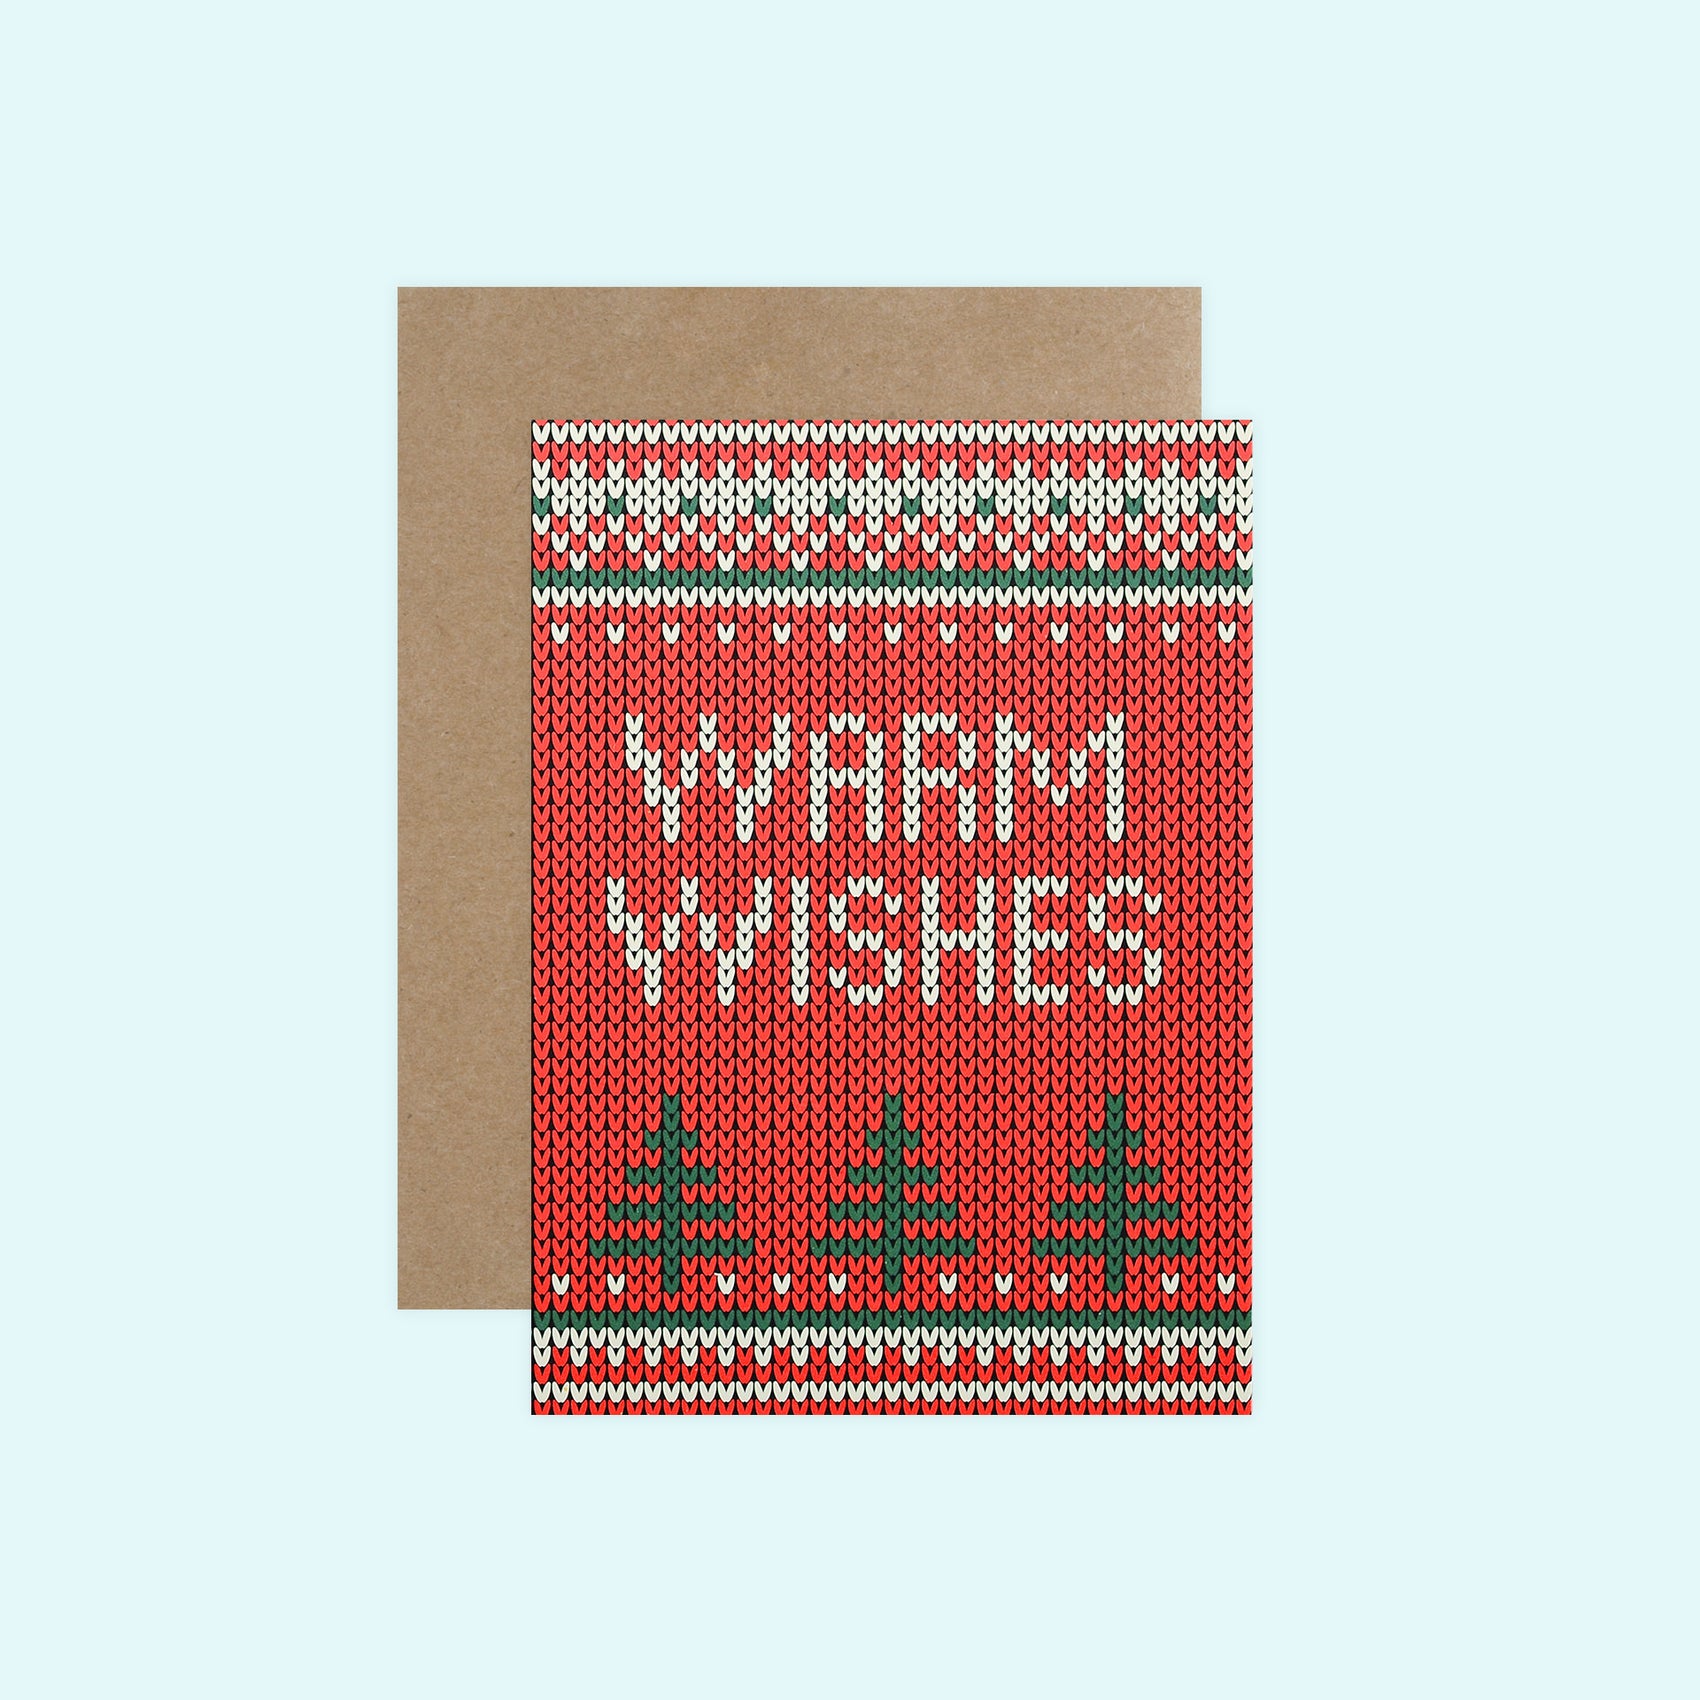 Warm Wishes Christmas Card